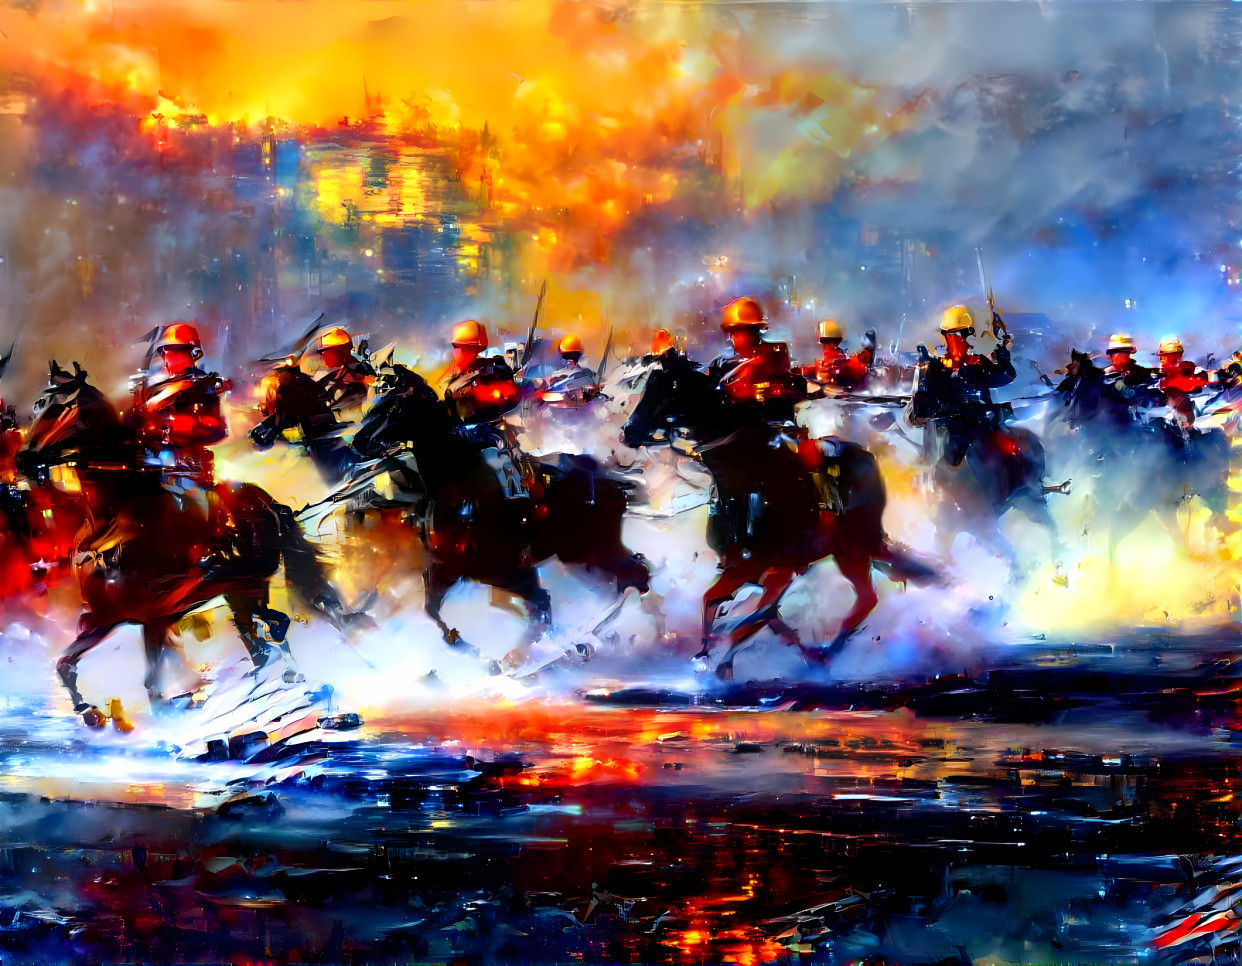  The Charge of the Light Brigade